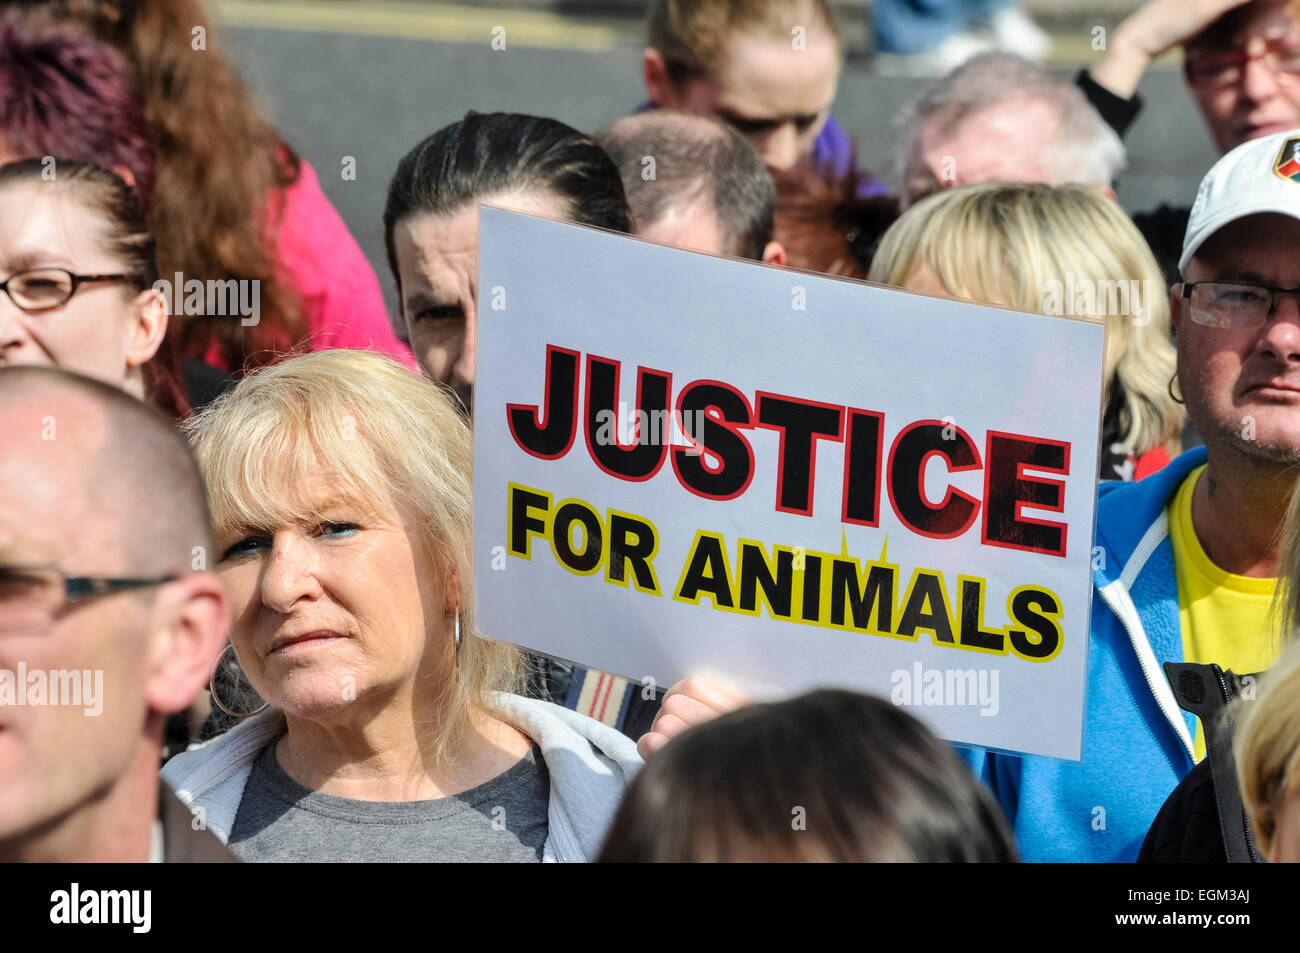 Belfast, Northern Ireland. 27 Apr 2014 - Hundreds of people gather for a rally calling for the end to animal cruelty, and stricter legislation for abusers. Stock Photo